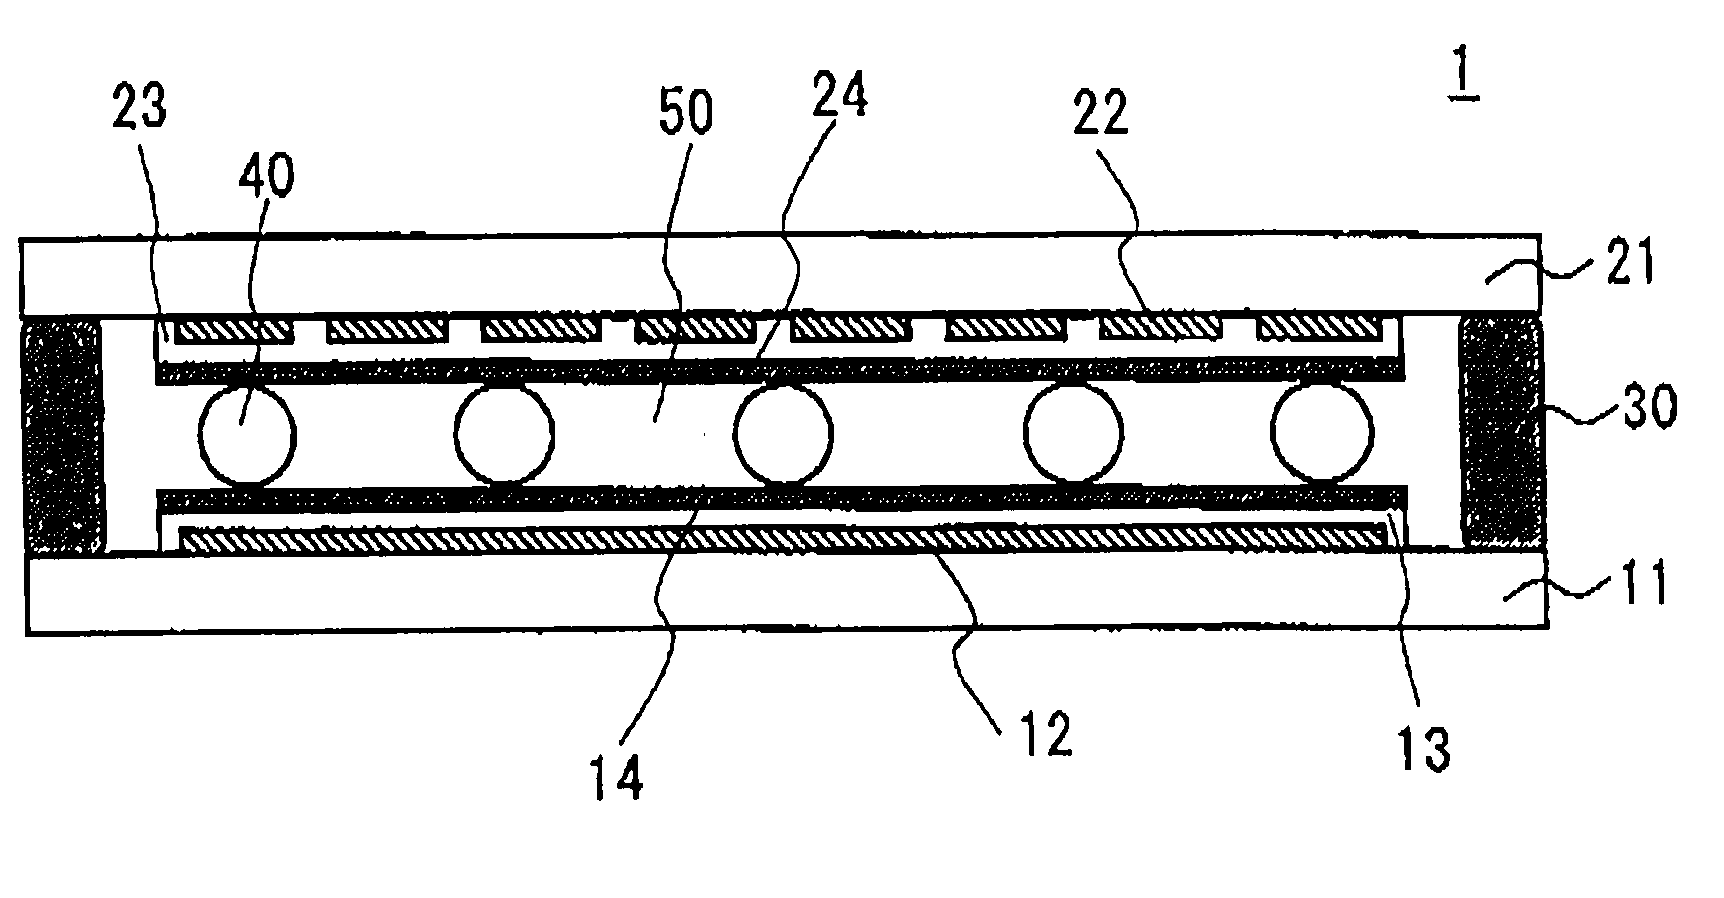 Liquid crystal optical device and process for its production